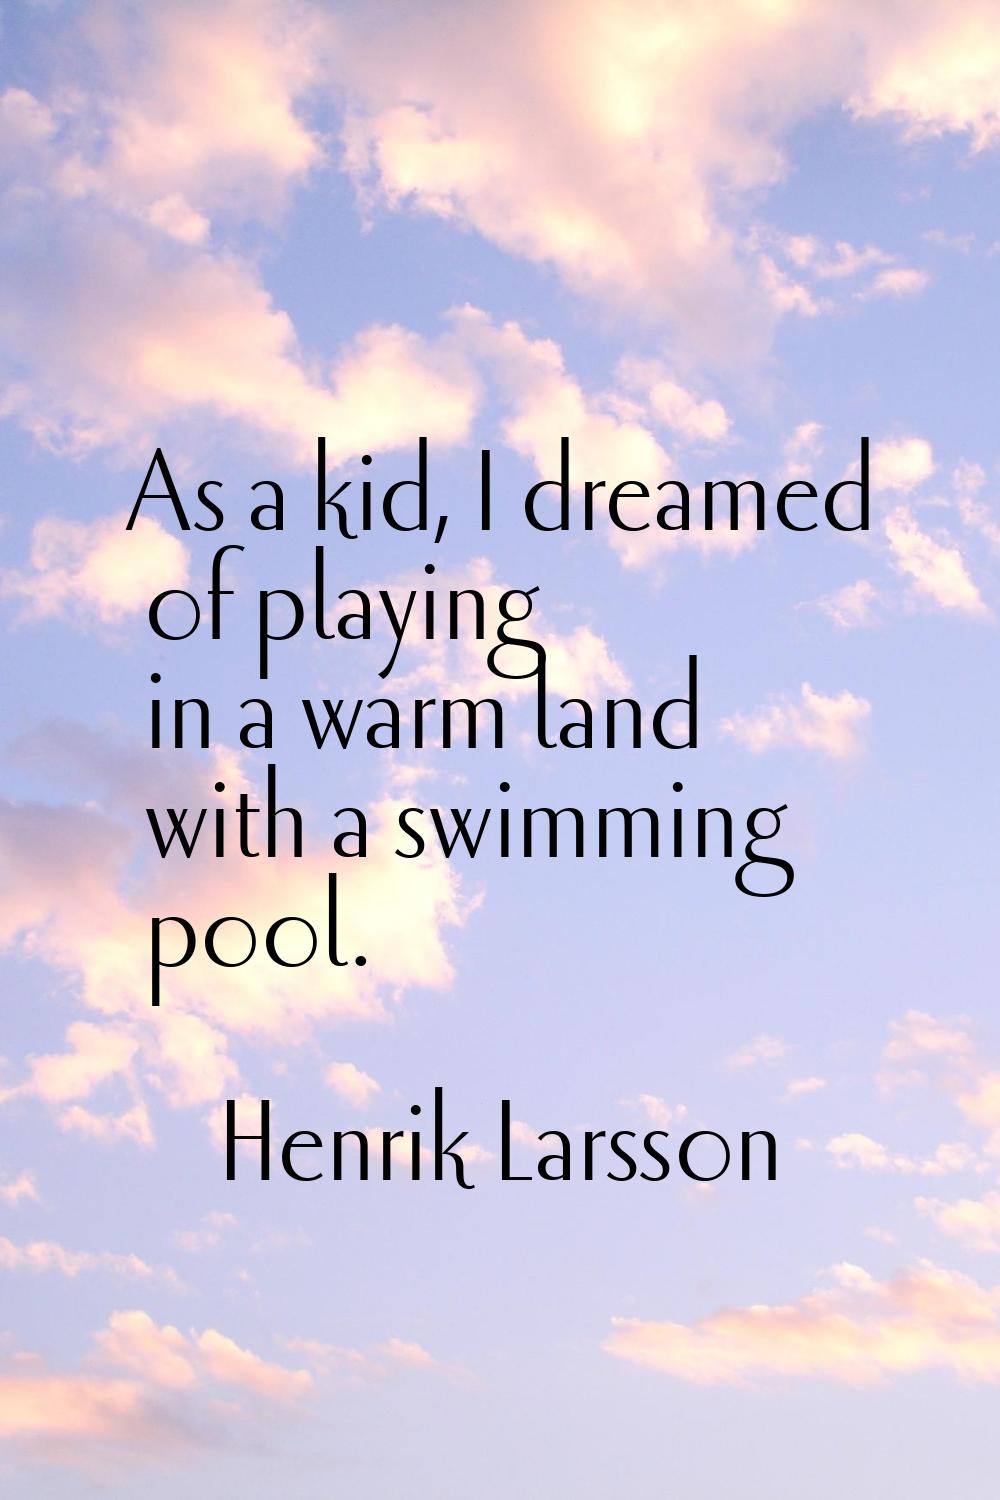 As a kid, I dreamed of playing in a warm land with a swimming pool.